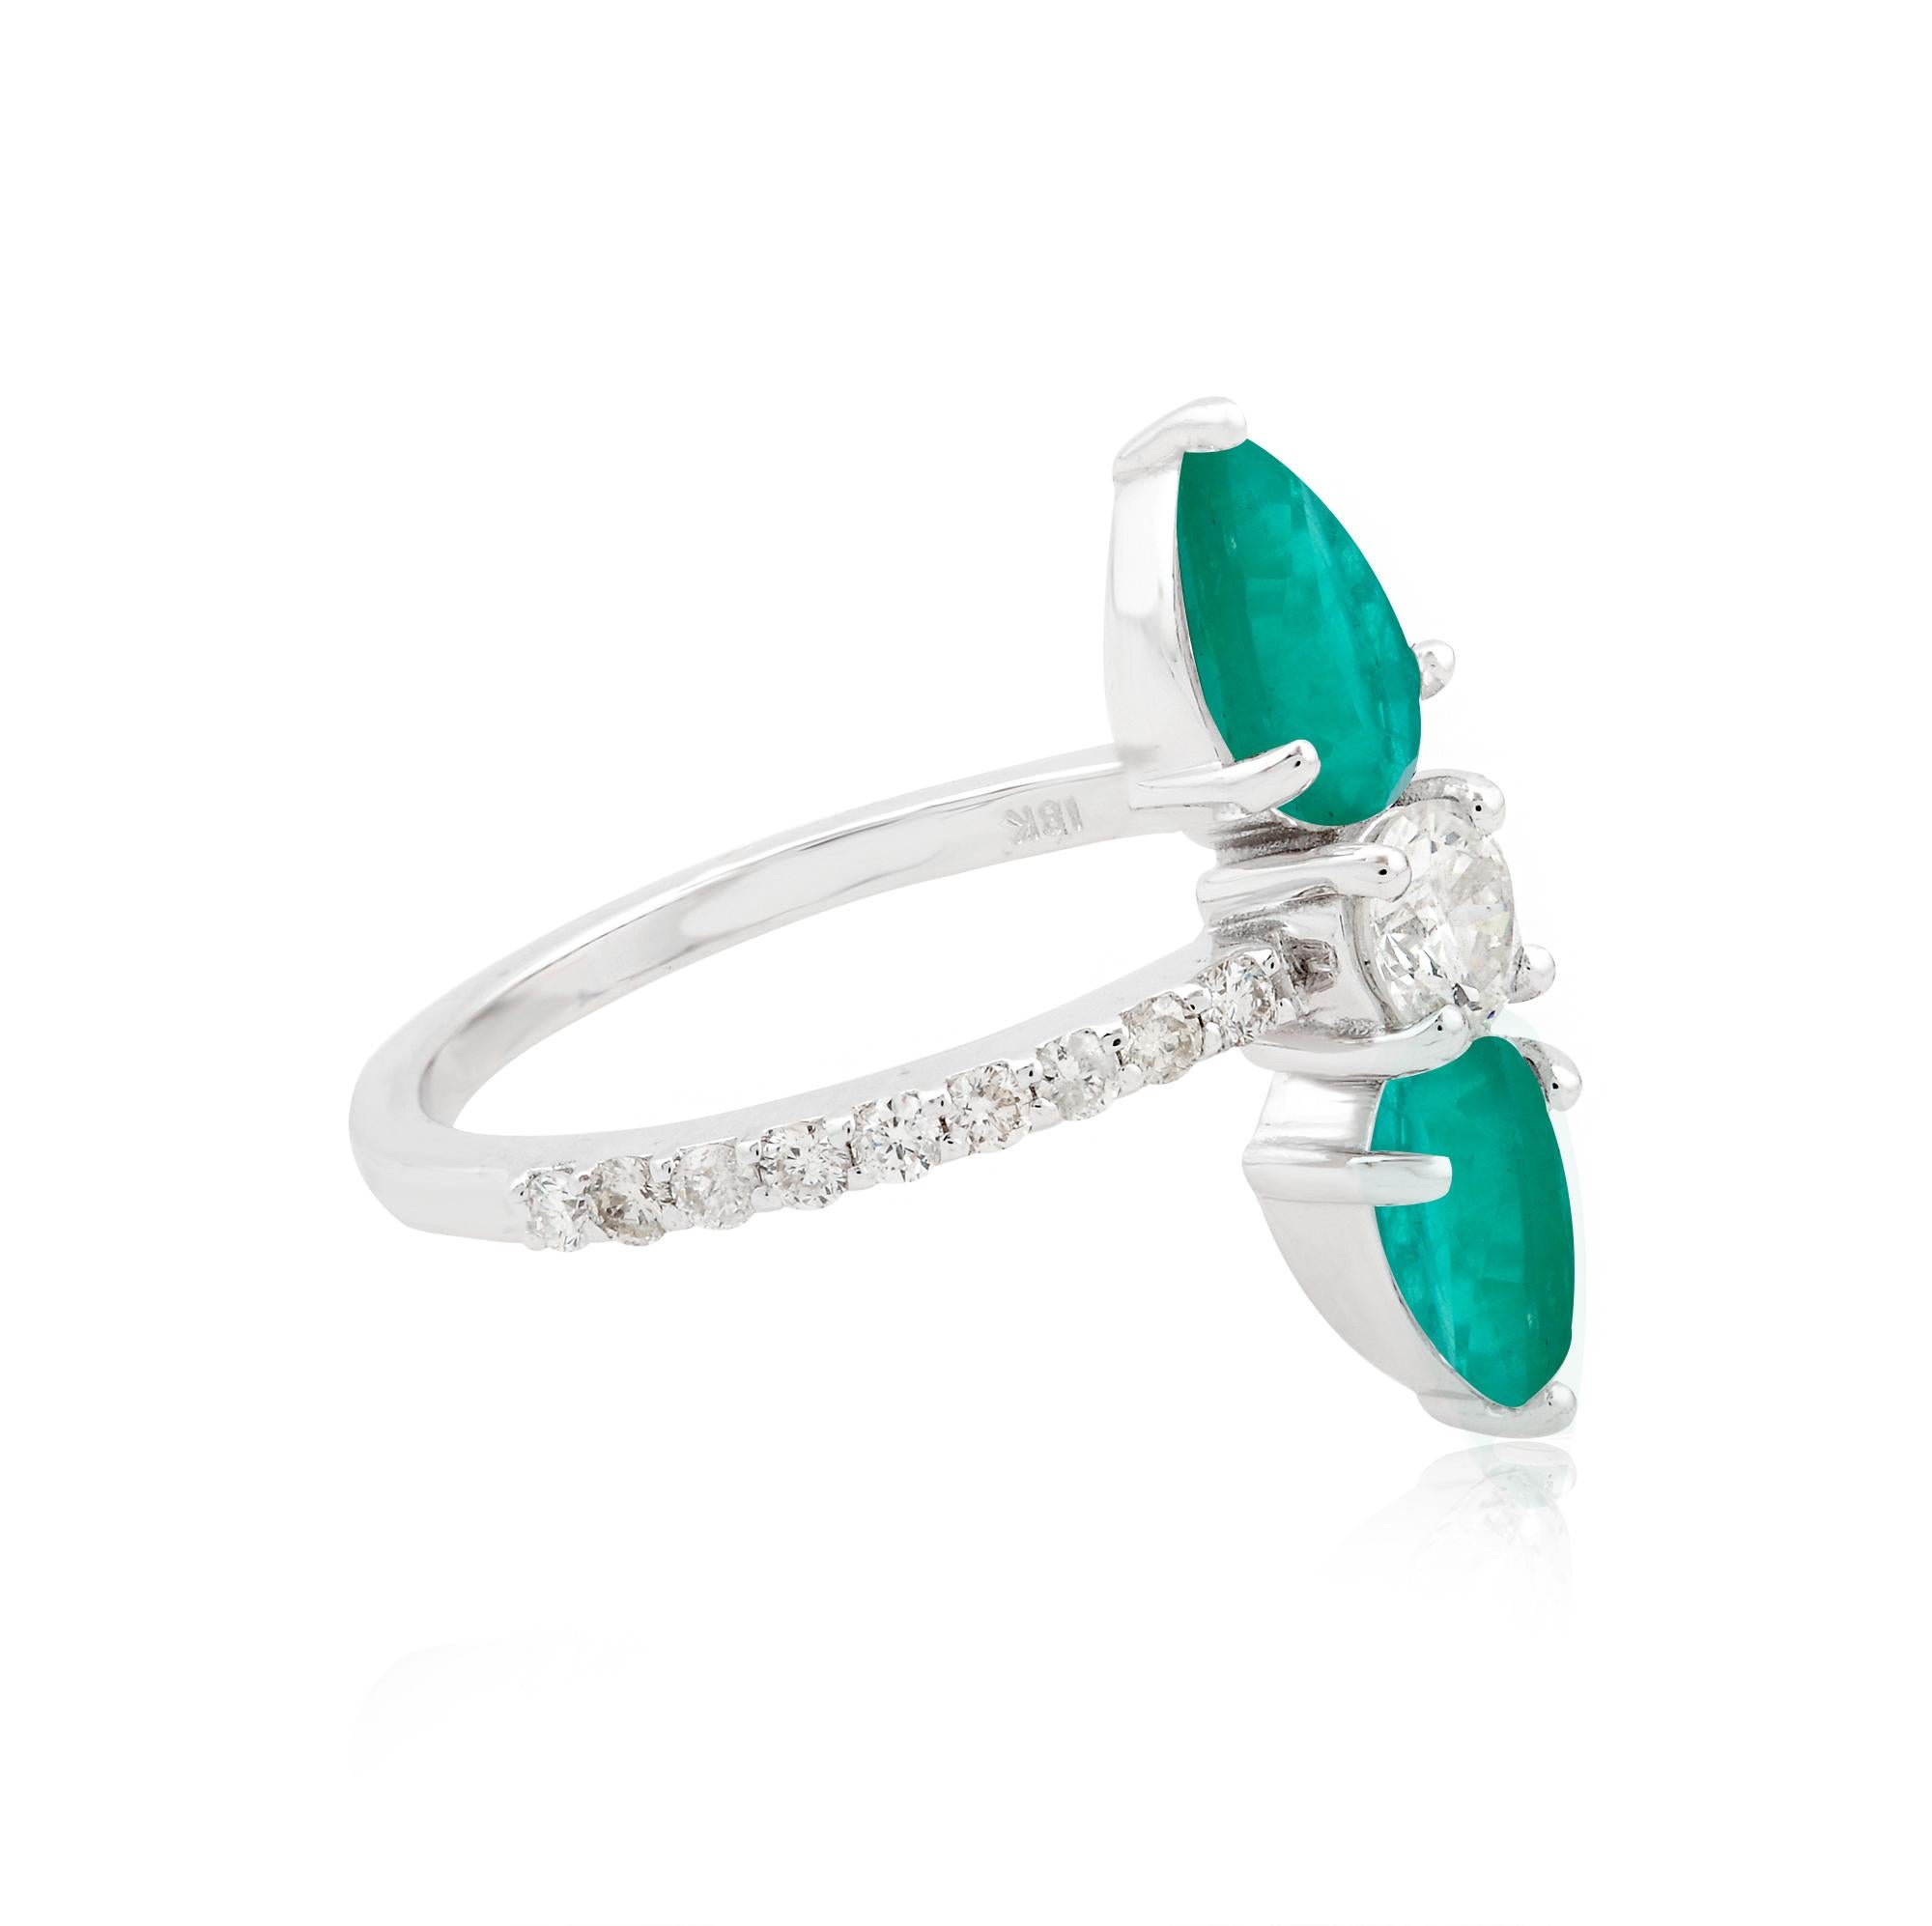 Indulge in the captivating beauty of this handmade ring, featuring a pear-shaped emerald gemstone nestled in a setting of 18-karat white gold. The vibrant green hue of the emerald exudes elegance and allure, making it a true standout in any jewelry